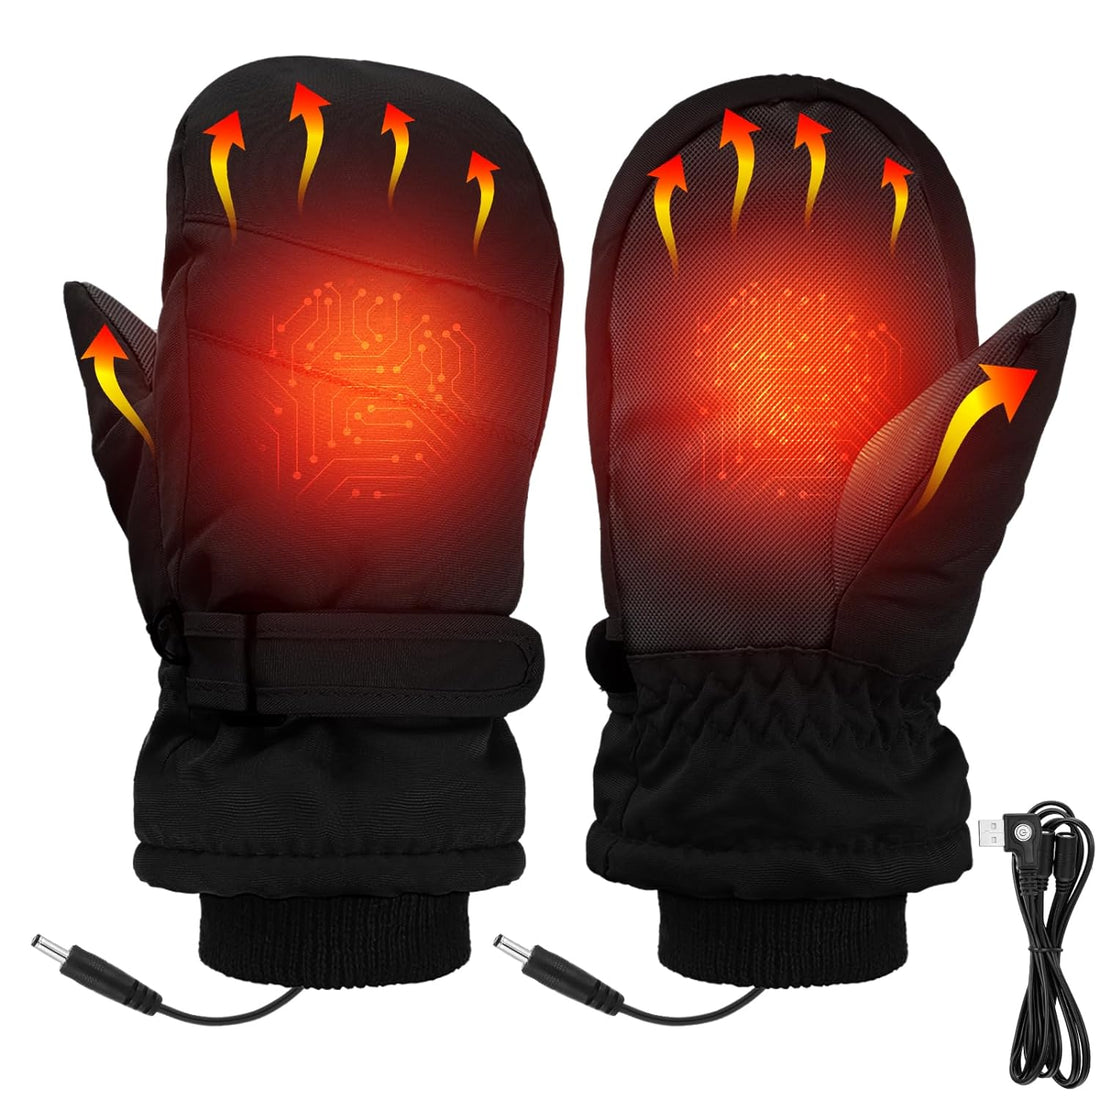 Funtery Black USB Heated Mittens Gloves Electric Heated Winter Snow Gloves for Kids Waterproof Warming Gloves Heated Ski Warm Winter Gloves for Skiing Skating Snowboarding Camping Hiking(5-8 Years)